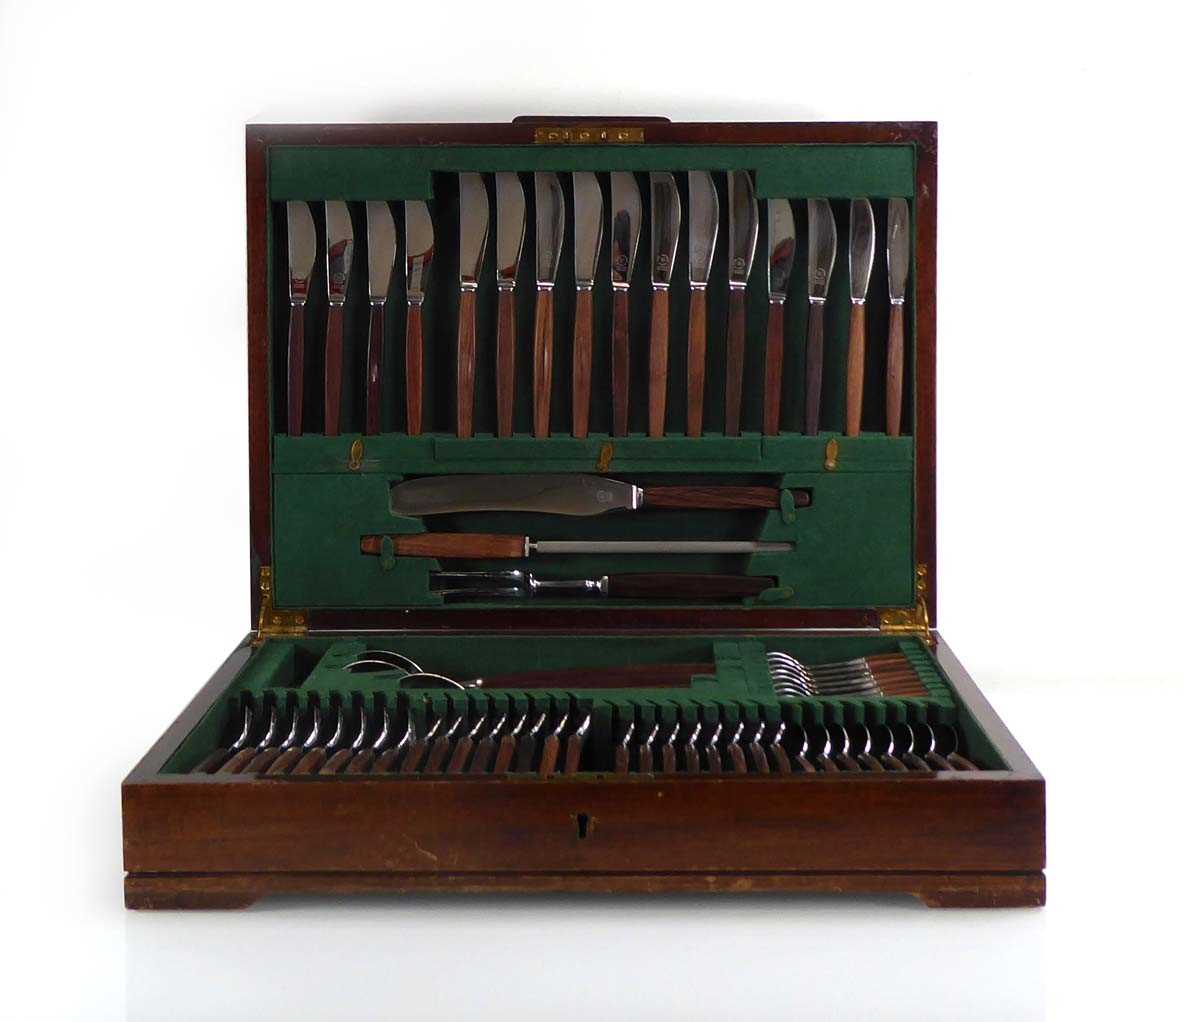 A late 1950's eight-sitting set of Danish cutlery with rosewood handles and stainless steel blades